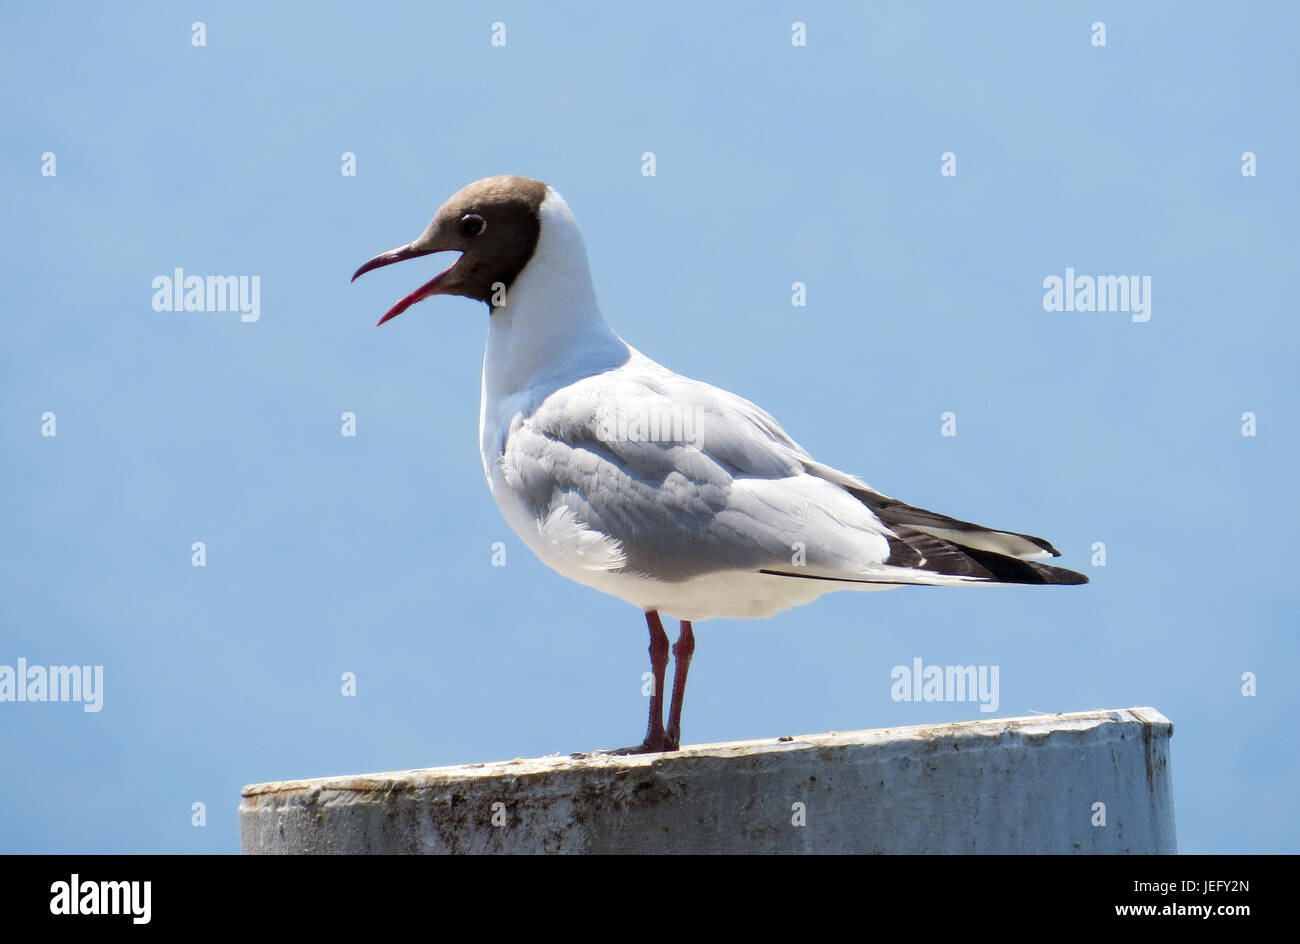 BLACK-HEADED GULL Chroicocephalus ridibundus in adult summer plumage clearly showing the chocolate-brown head. Photo: Tony Gale Stock Photo